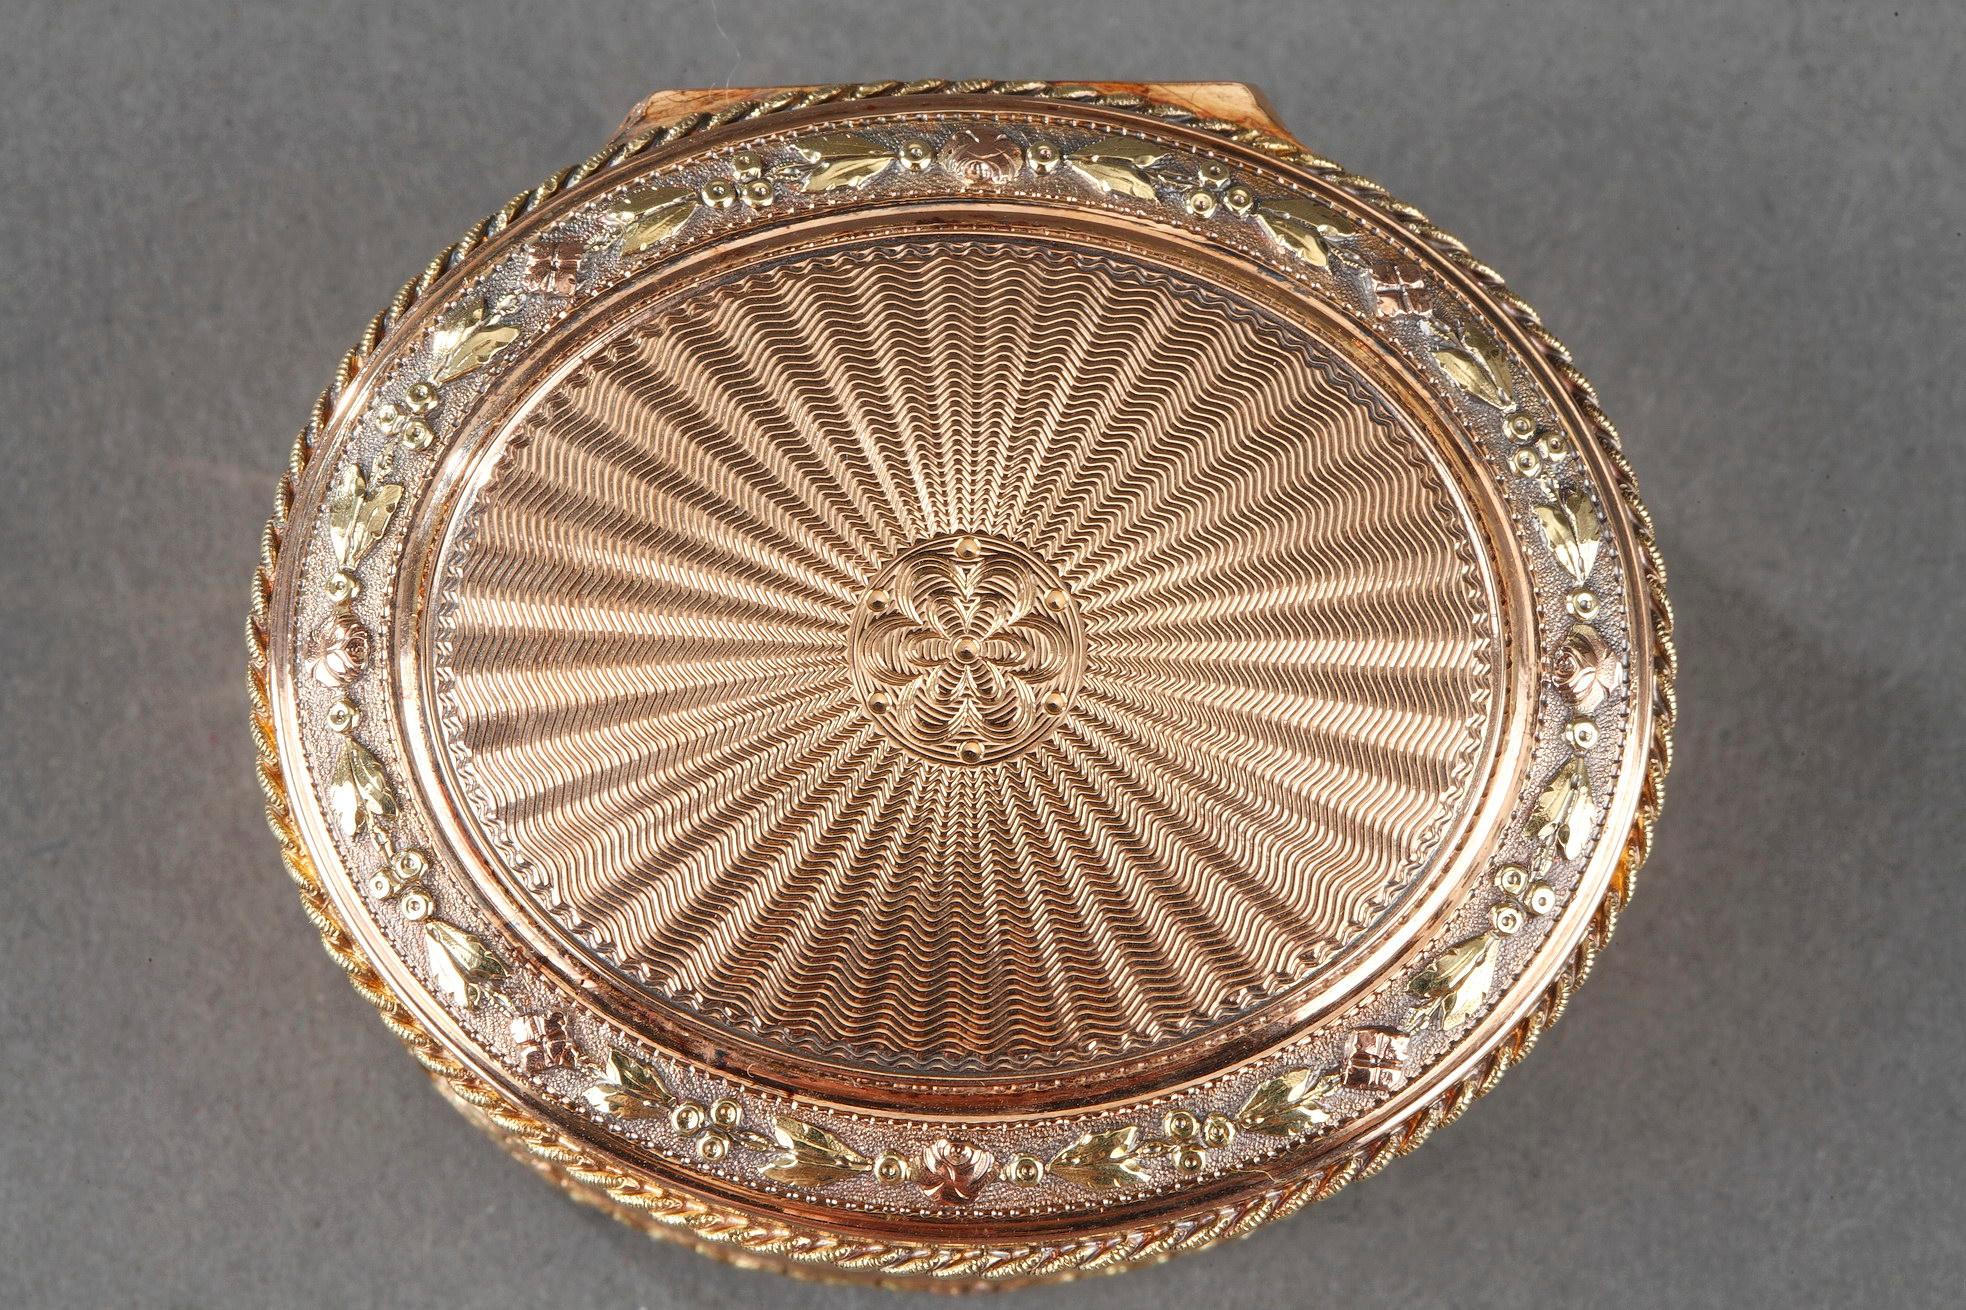 Val gold snuff box. The hinged lid is decorated with a radiant guilloche pattern and surrounded by a frieze of roses and leaves in an amati background. The body of the box also has wave guilloche pattern panels interspersed with a flower